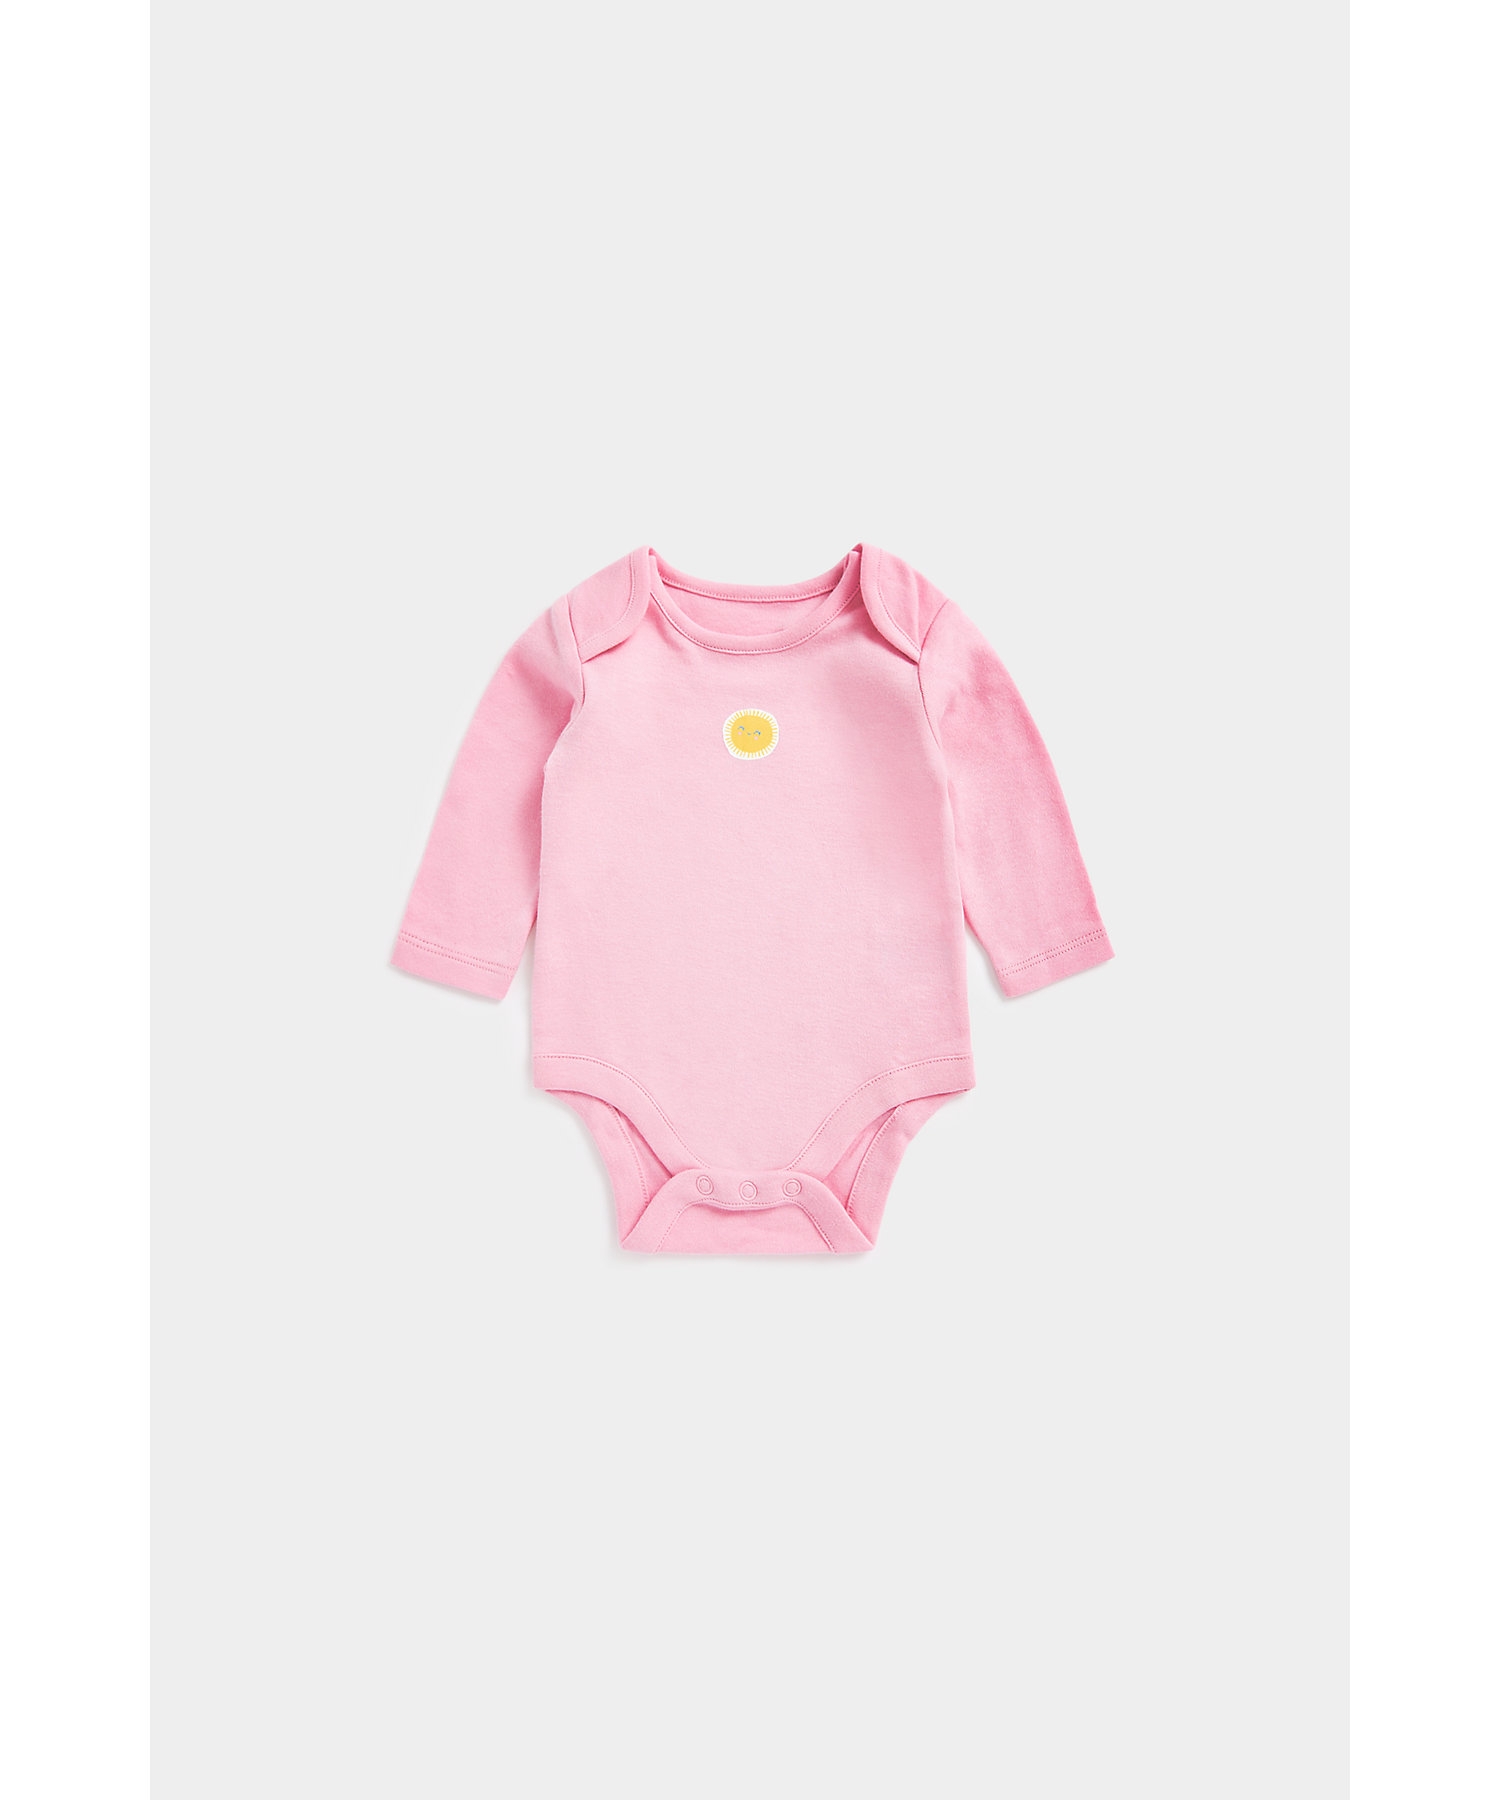 Mothercare | Girls Full Sleeves Bodysuits Fun Colorful Designs-Multicolor 5